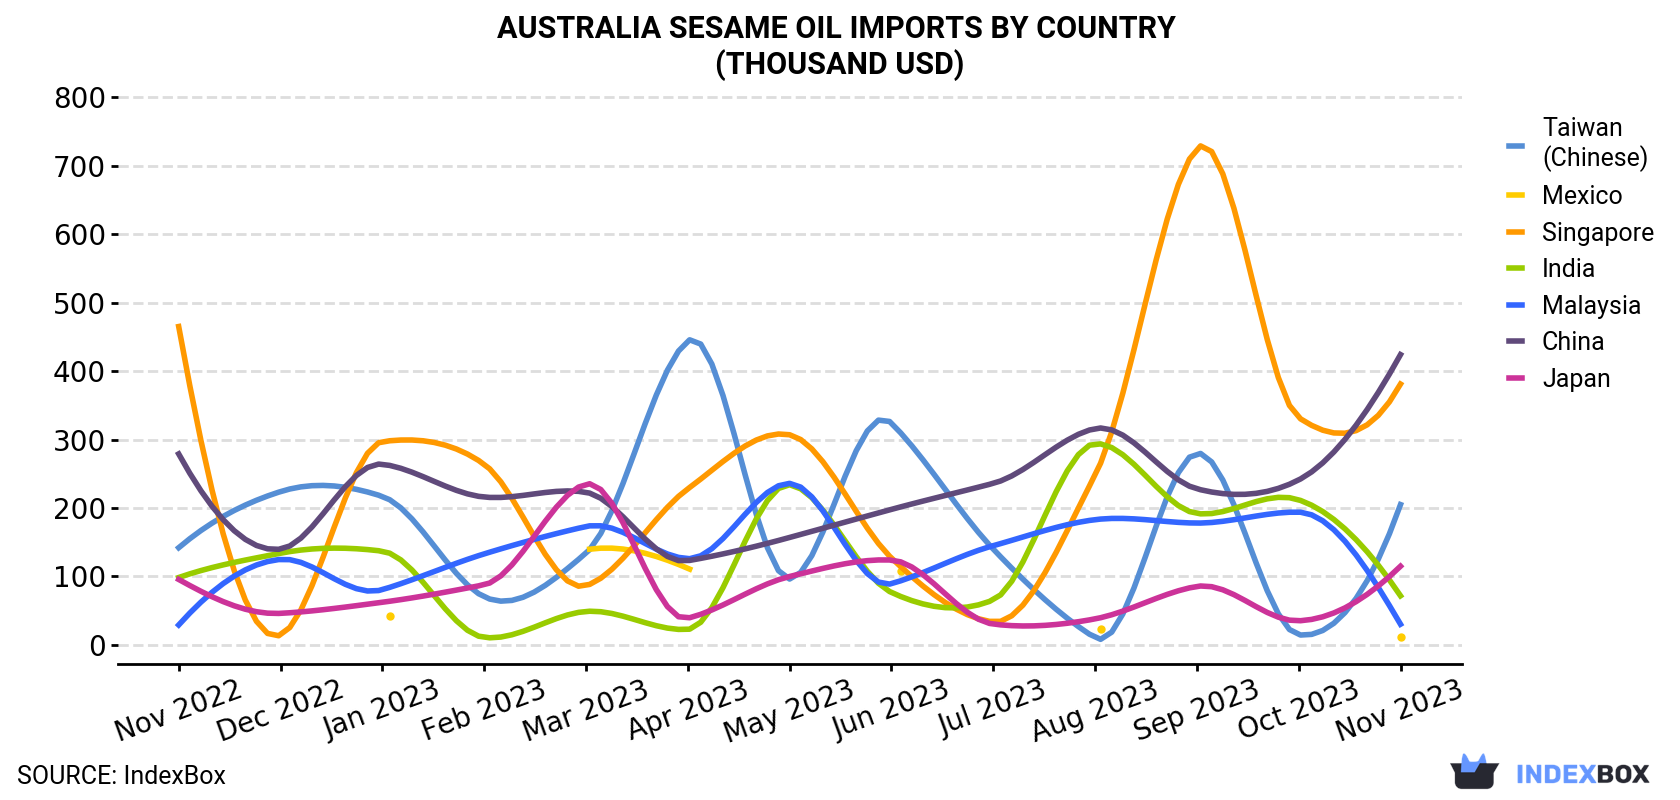 Australia Sesame Oil Imports By Country (Thousand USD)